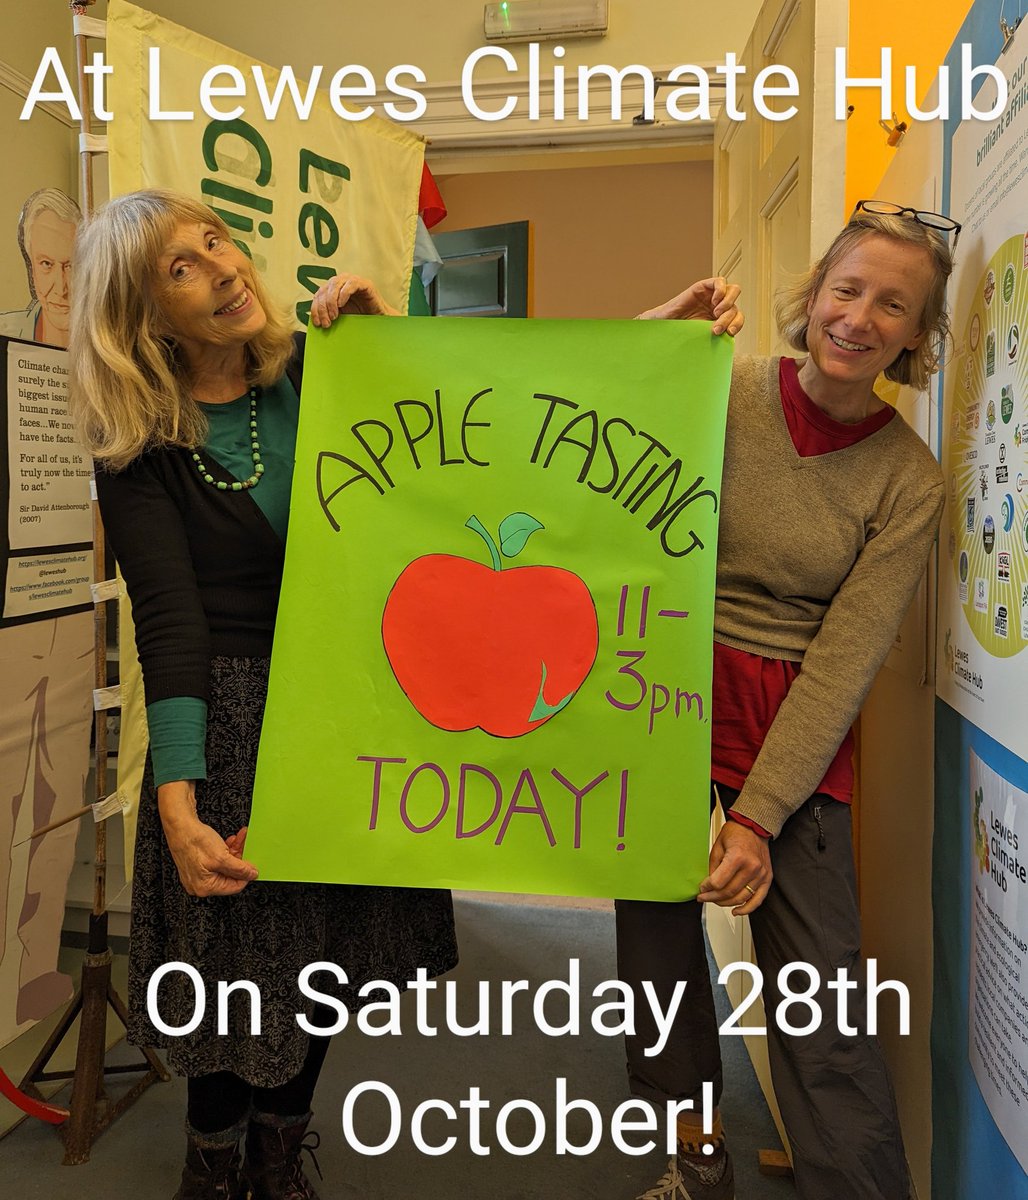 As part of our #growlocal season -  Apple Tasting Day @LewesClimateHub on Saturday 28th October from 11.00 to 3.00.
Join us at Lewes House, 32 High Street, #Lewes!